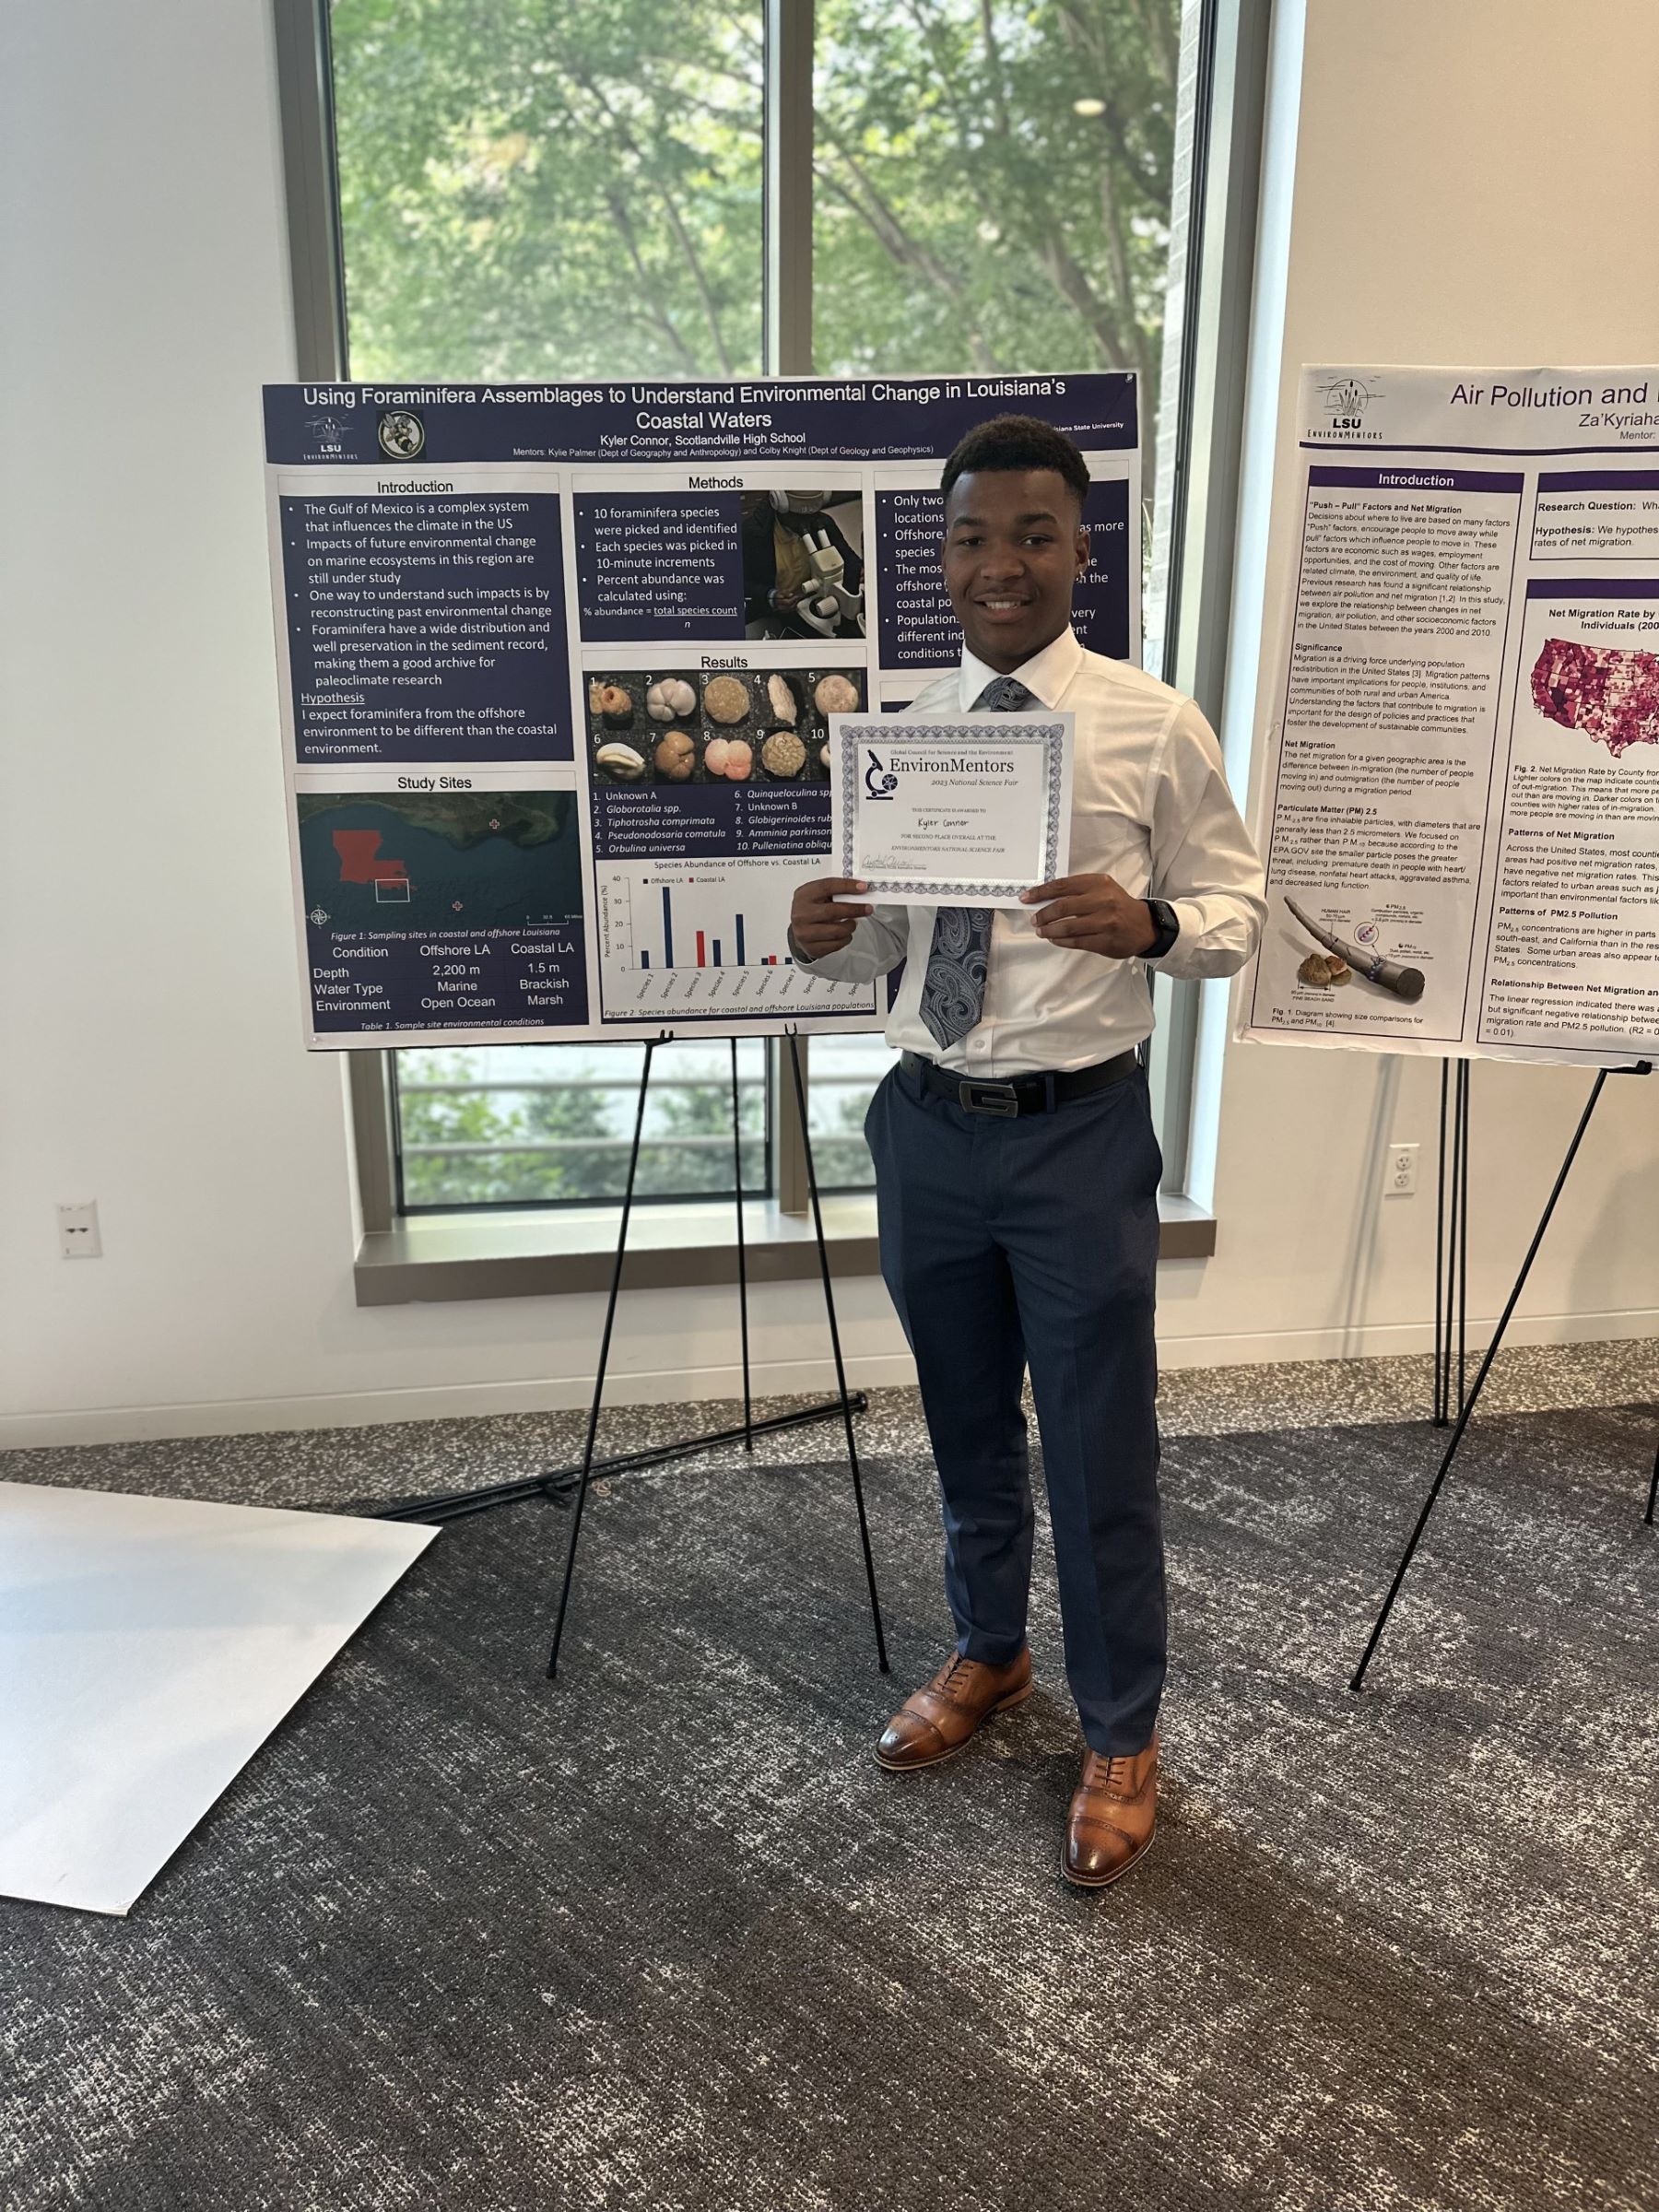 Kyler poses with his award in front of his research poster